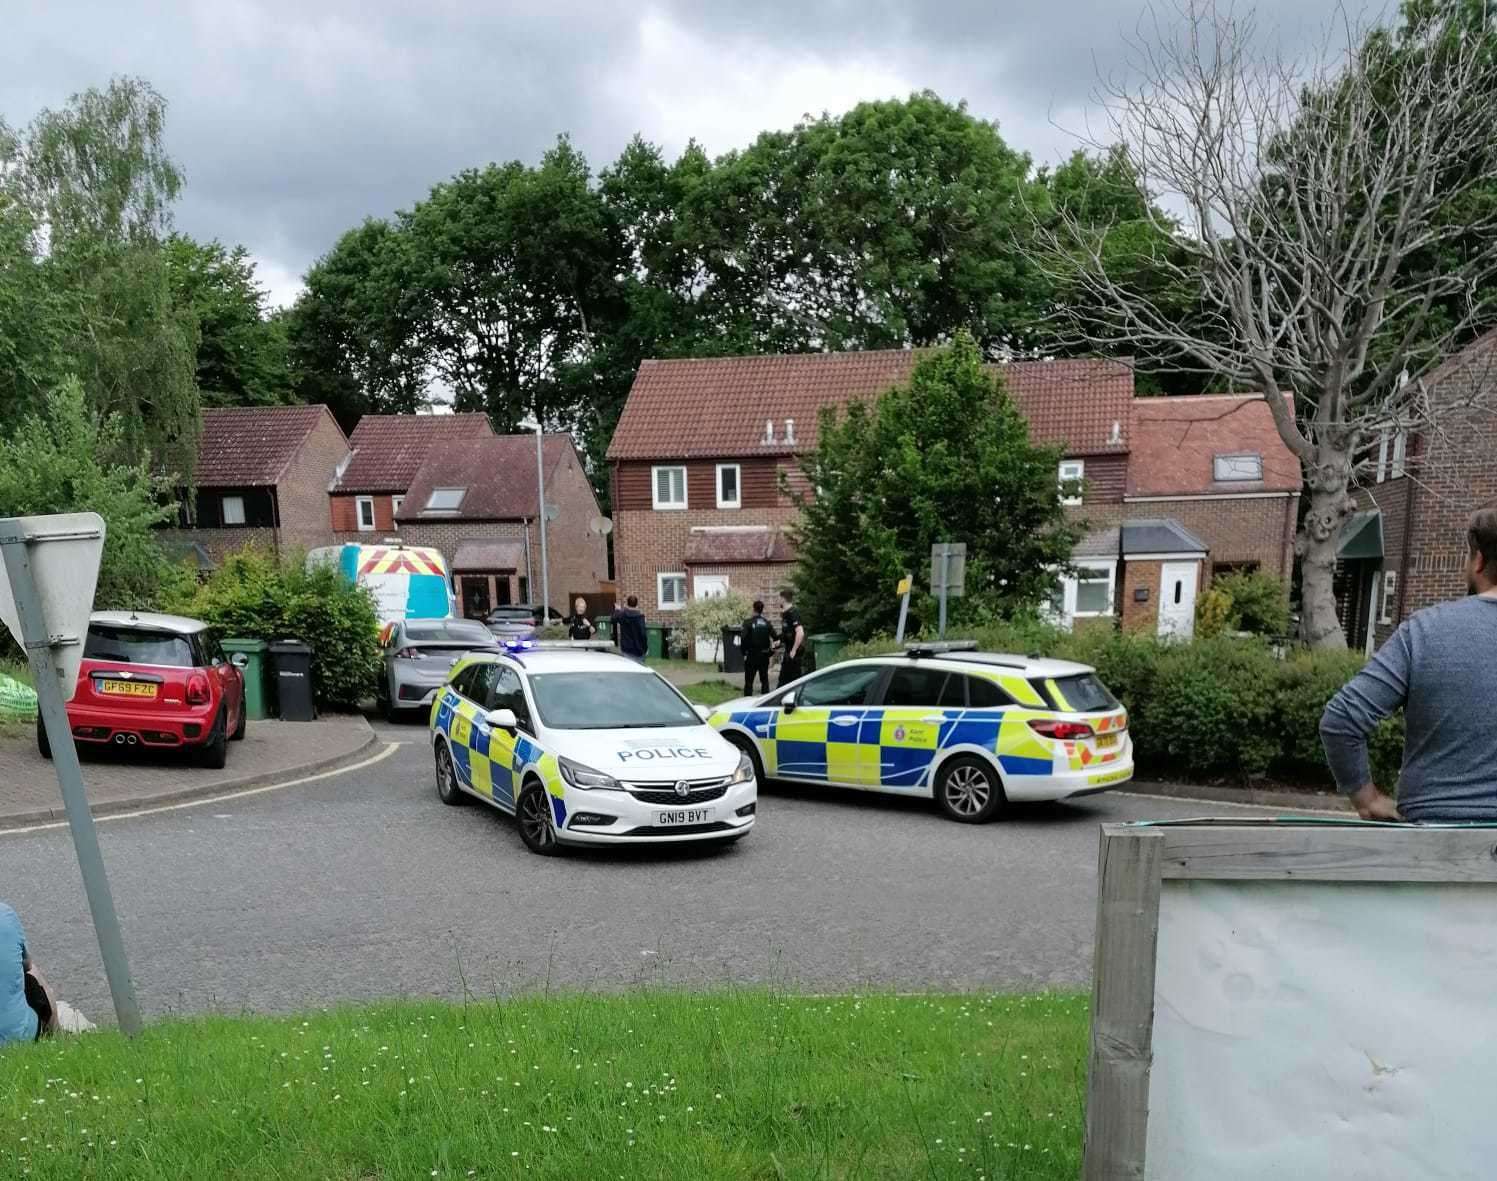 People have been evacuated from their homes after the discovery of a suspected bomb